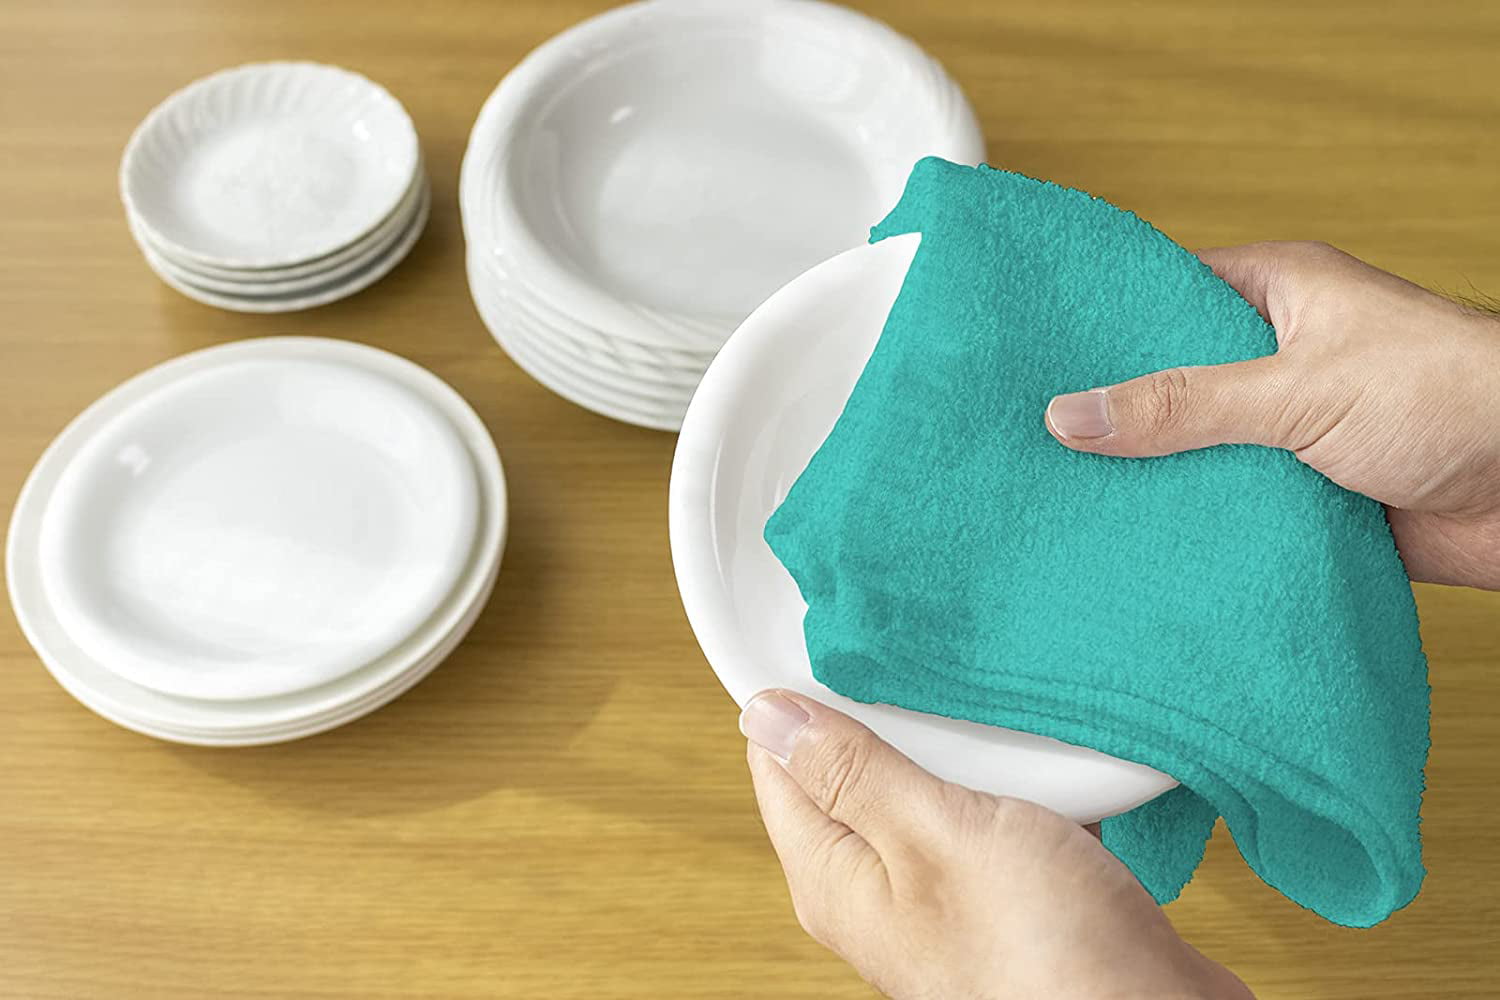 DecorRack 8 Kitchen Dish Towels, 100% Cotton, 12 x 12 Inch, Teal Green  (Pack of 8)